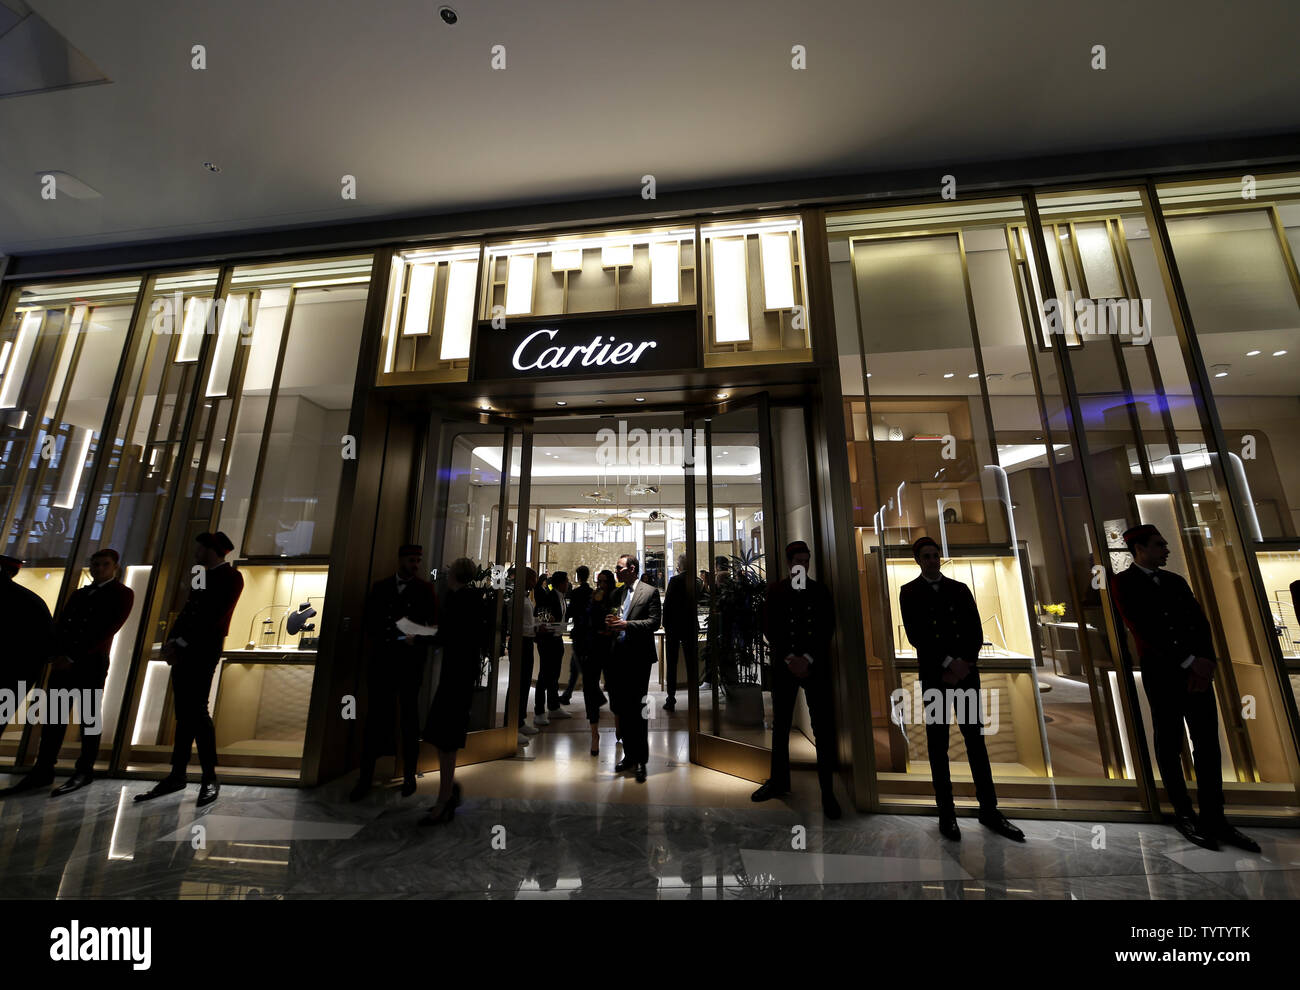 cartier outlet new york